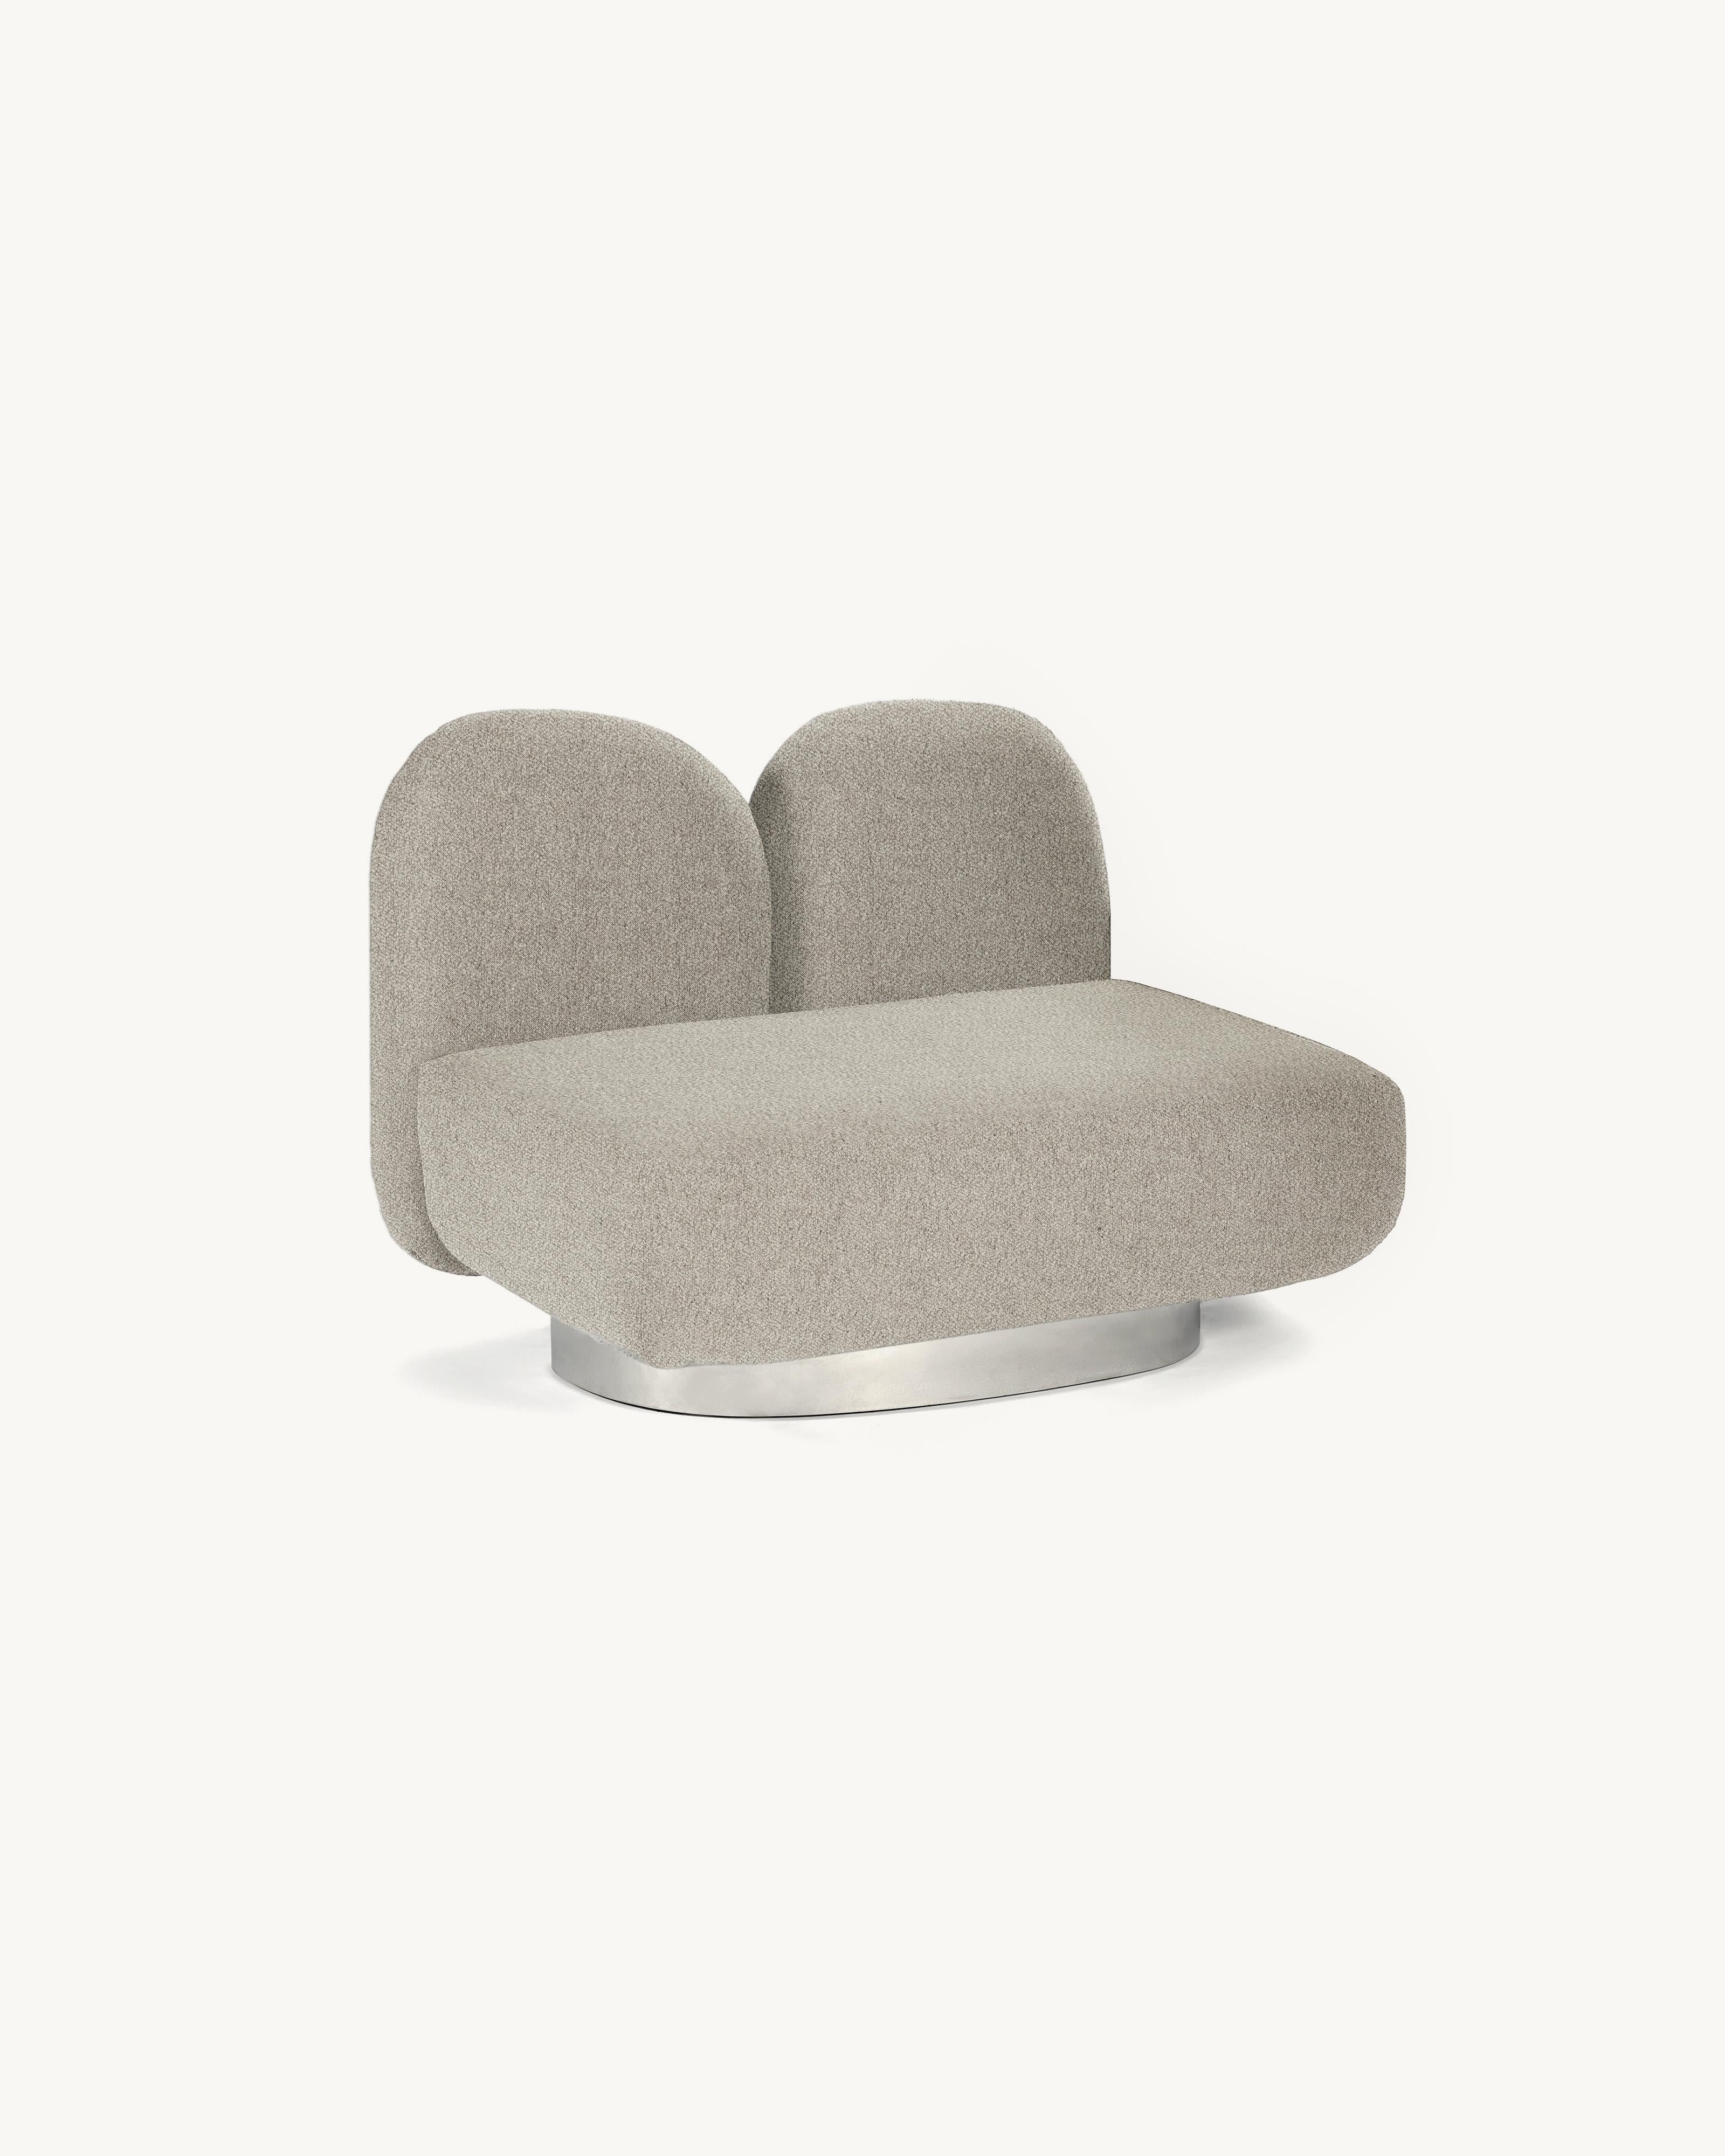 Modular Sofa Assemble 1-seat-sofa 
Designed by Destroyers/Builders x Valerie Objects
Upholstery: Bangar Sand

Code: V9020336

Dimensions: L 87 W 103 H 85 CM (SH 40 cm)
Materials: Wood, aluminium and upholstery

The ASSEMBLE sofa encourages exactly